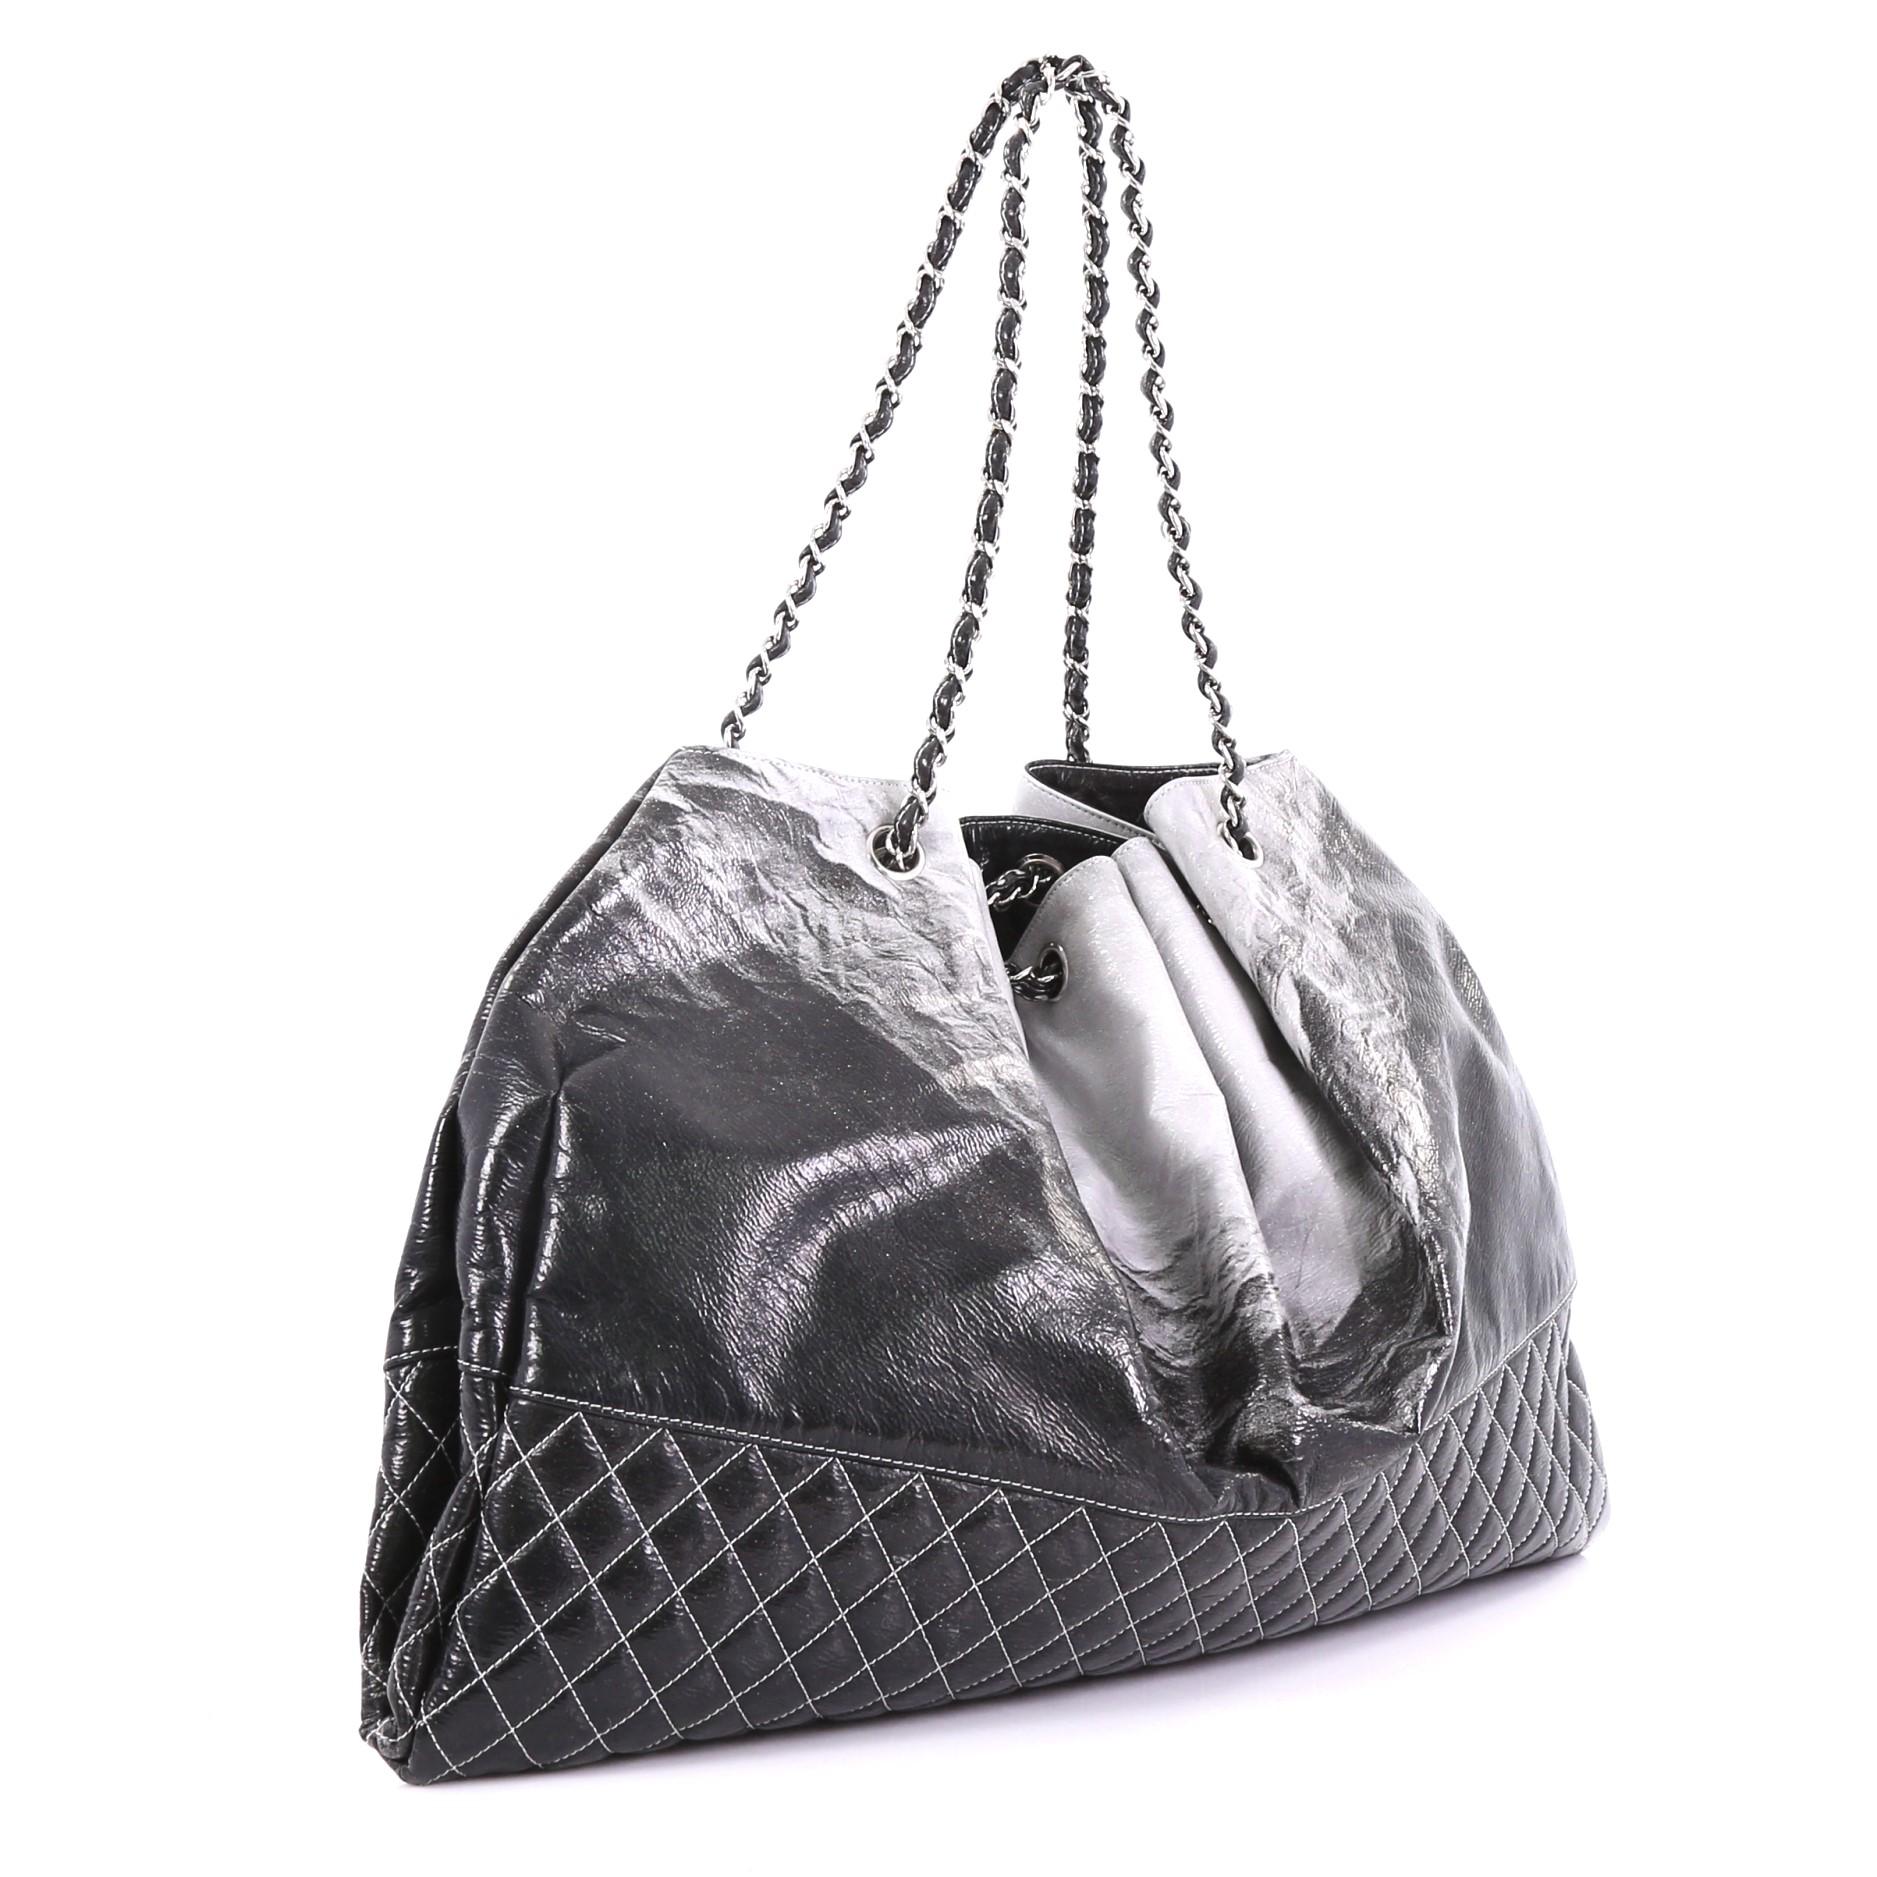 Gray Chanel Melrose Degrade Cabas Tote Patent